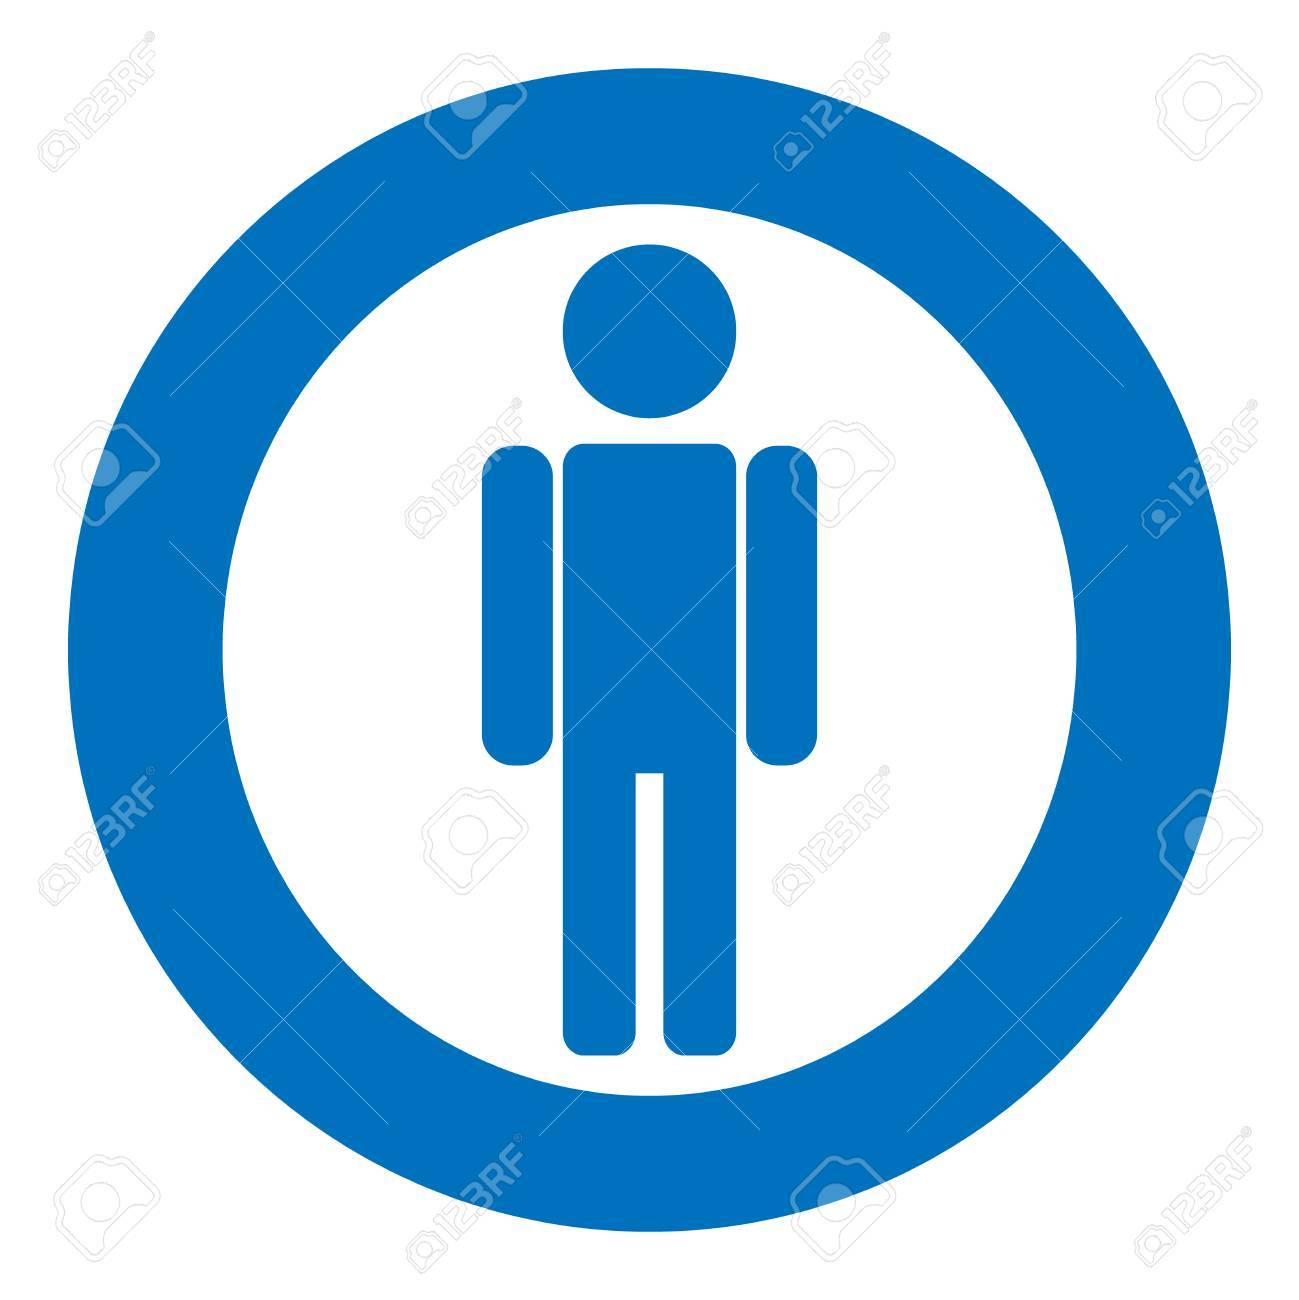 Male gender icon Vector Image - 1994644 | StockUnlimited